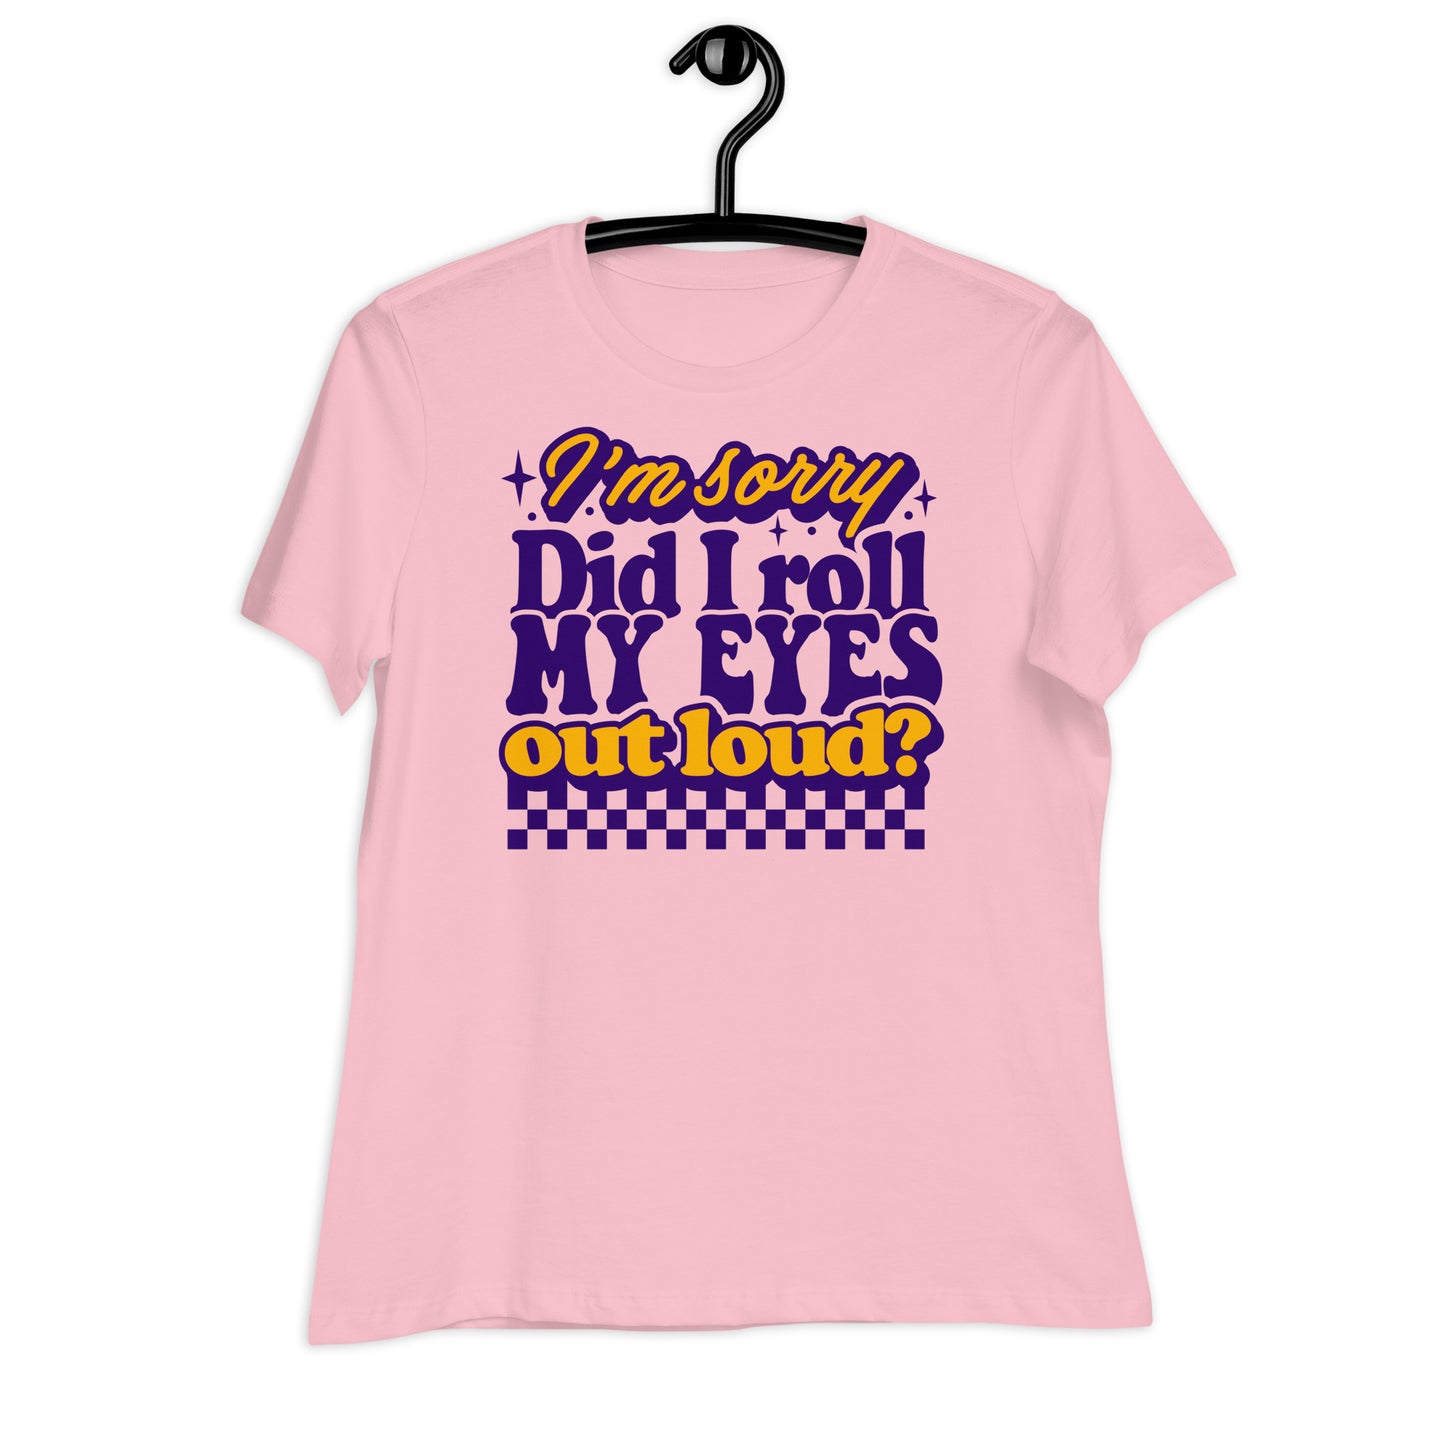 I'm Sorry, Did I Roll My Eyes Out Loud Bella Canvas Relaxed Women's T-Shirt